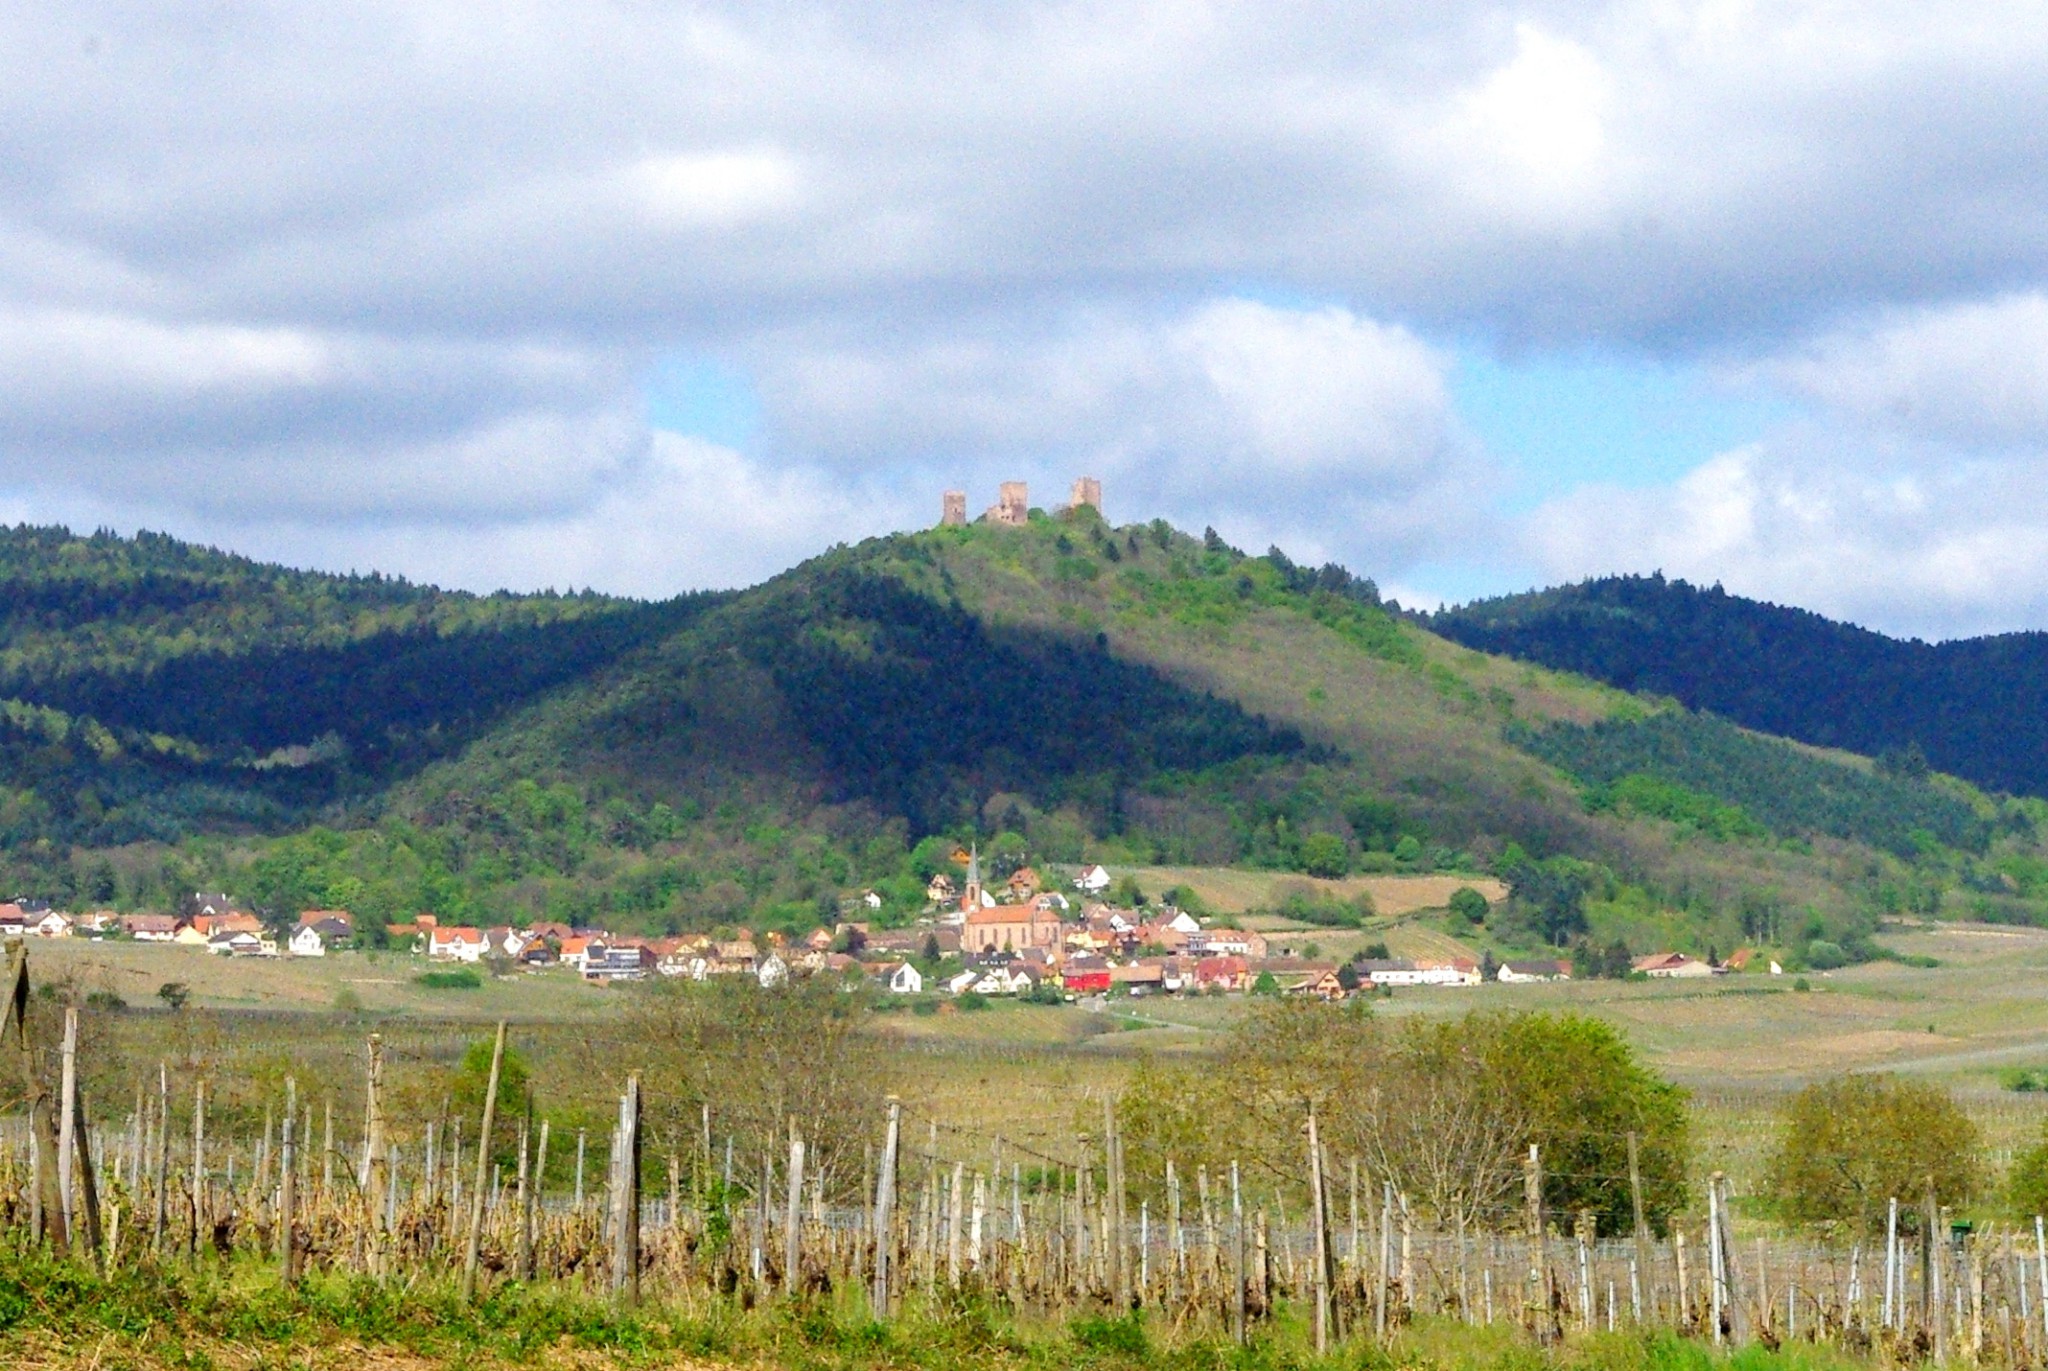 The three castles of Eguisheim seen from the vineyards © French Moments